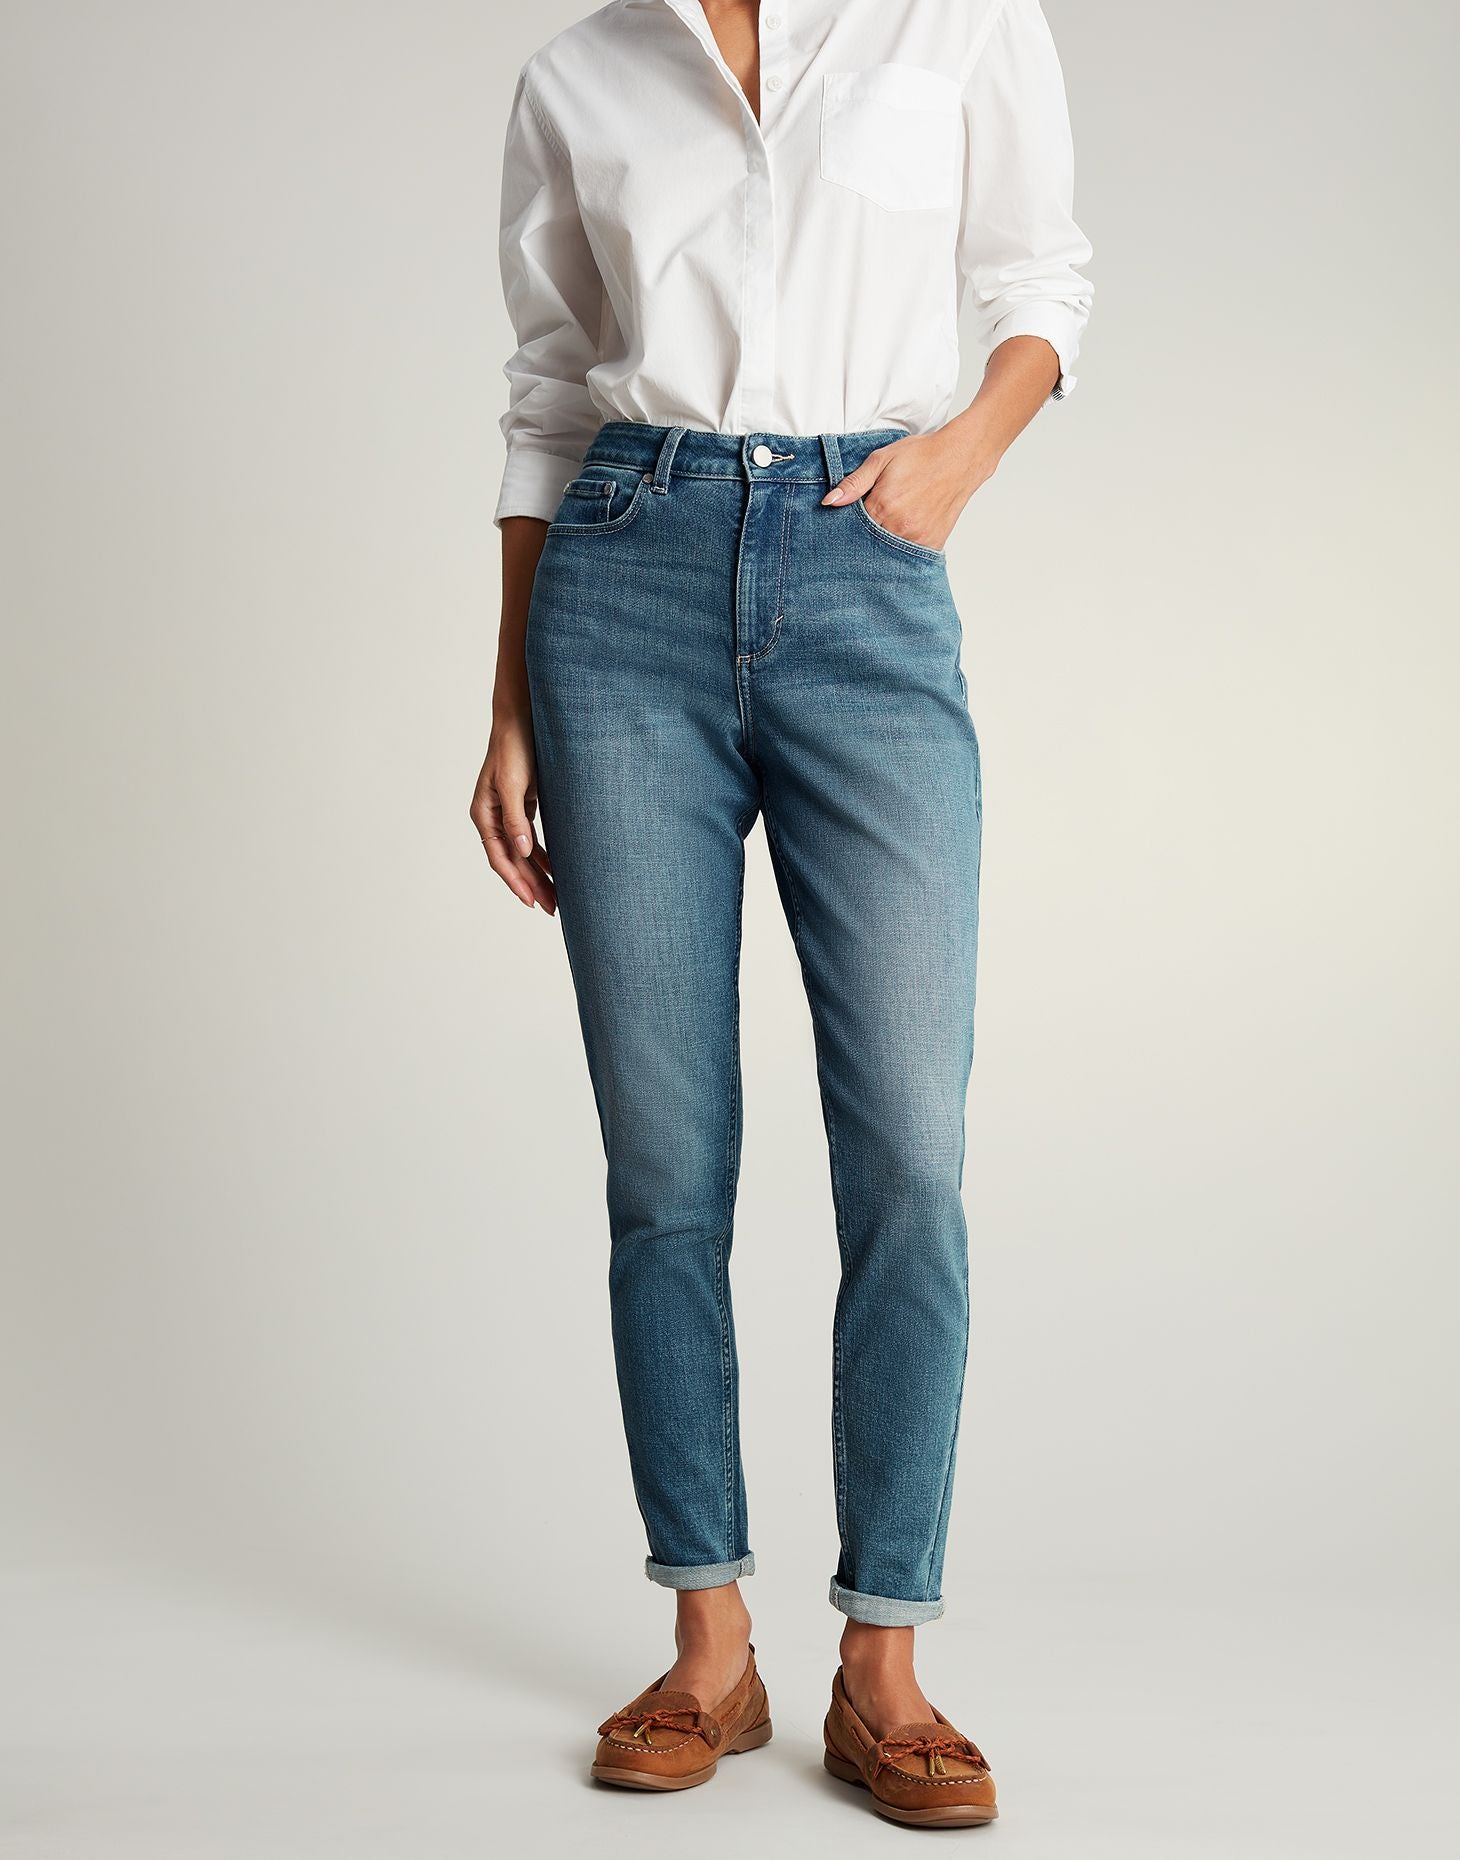 Joules Monroe High Rise Stretch Skinny Jeans